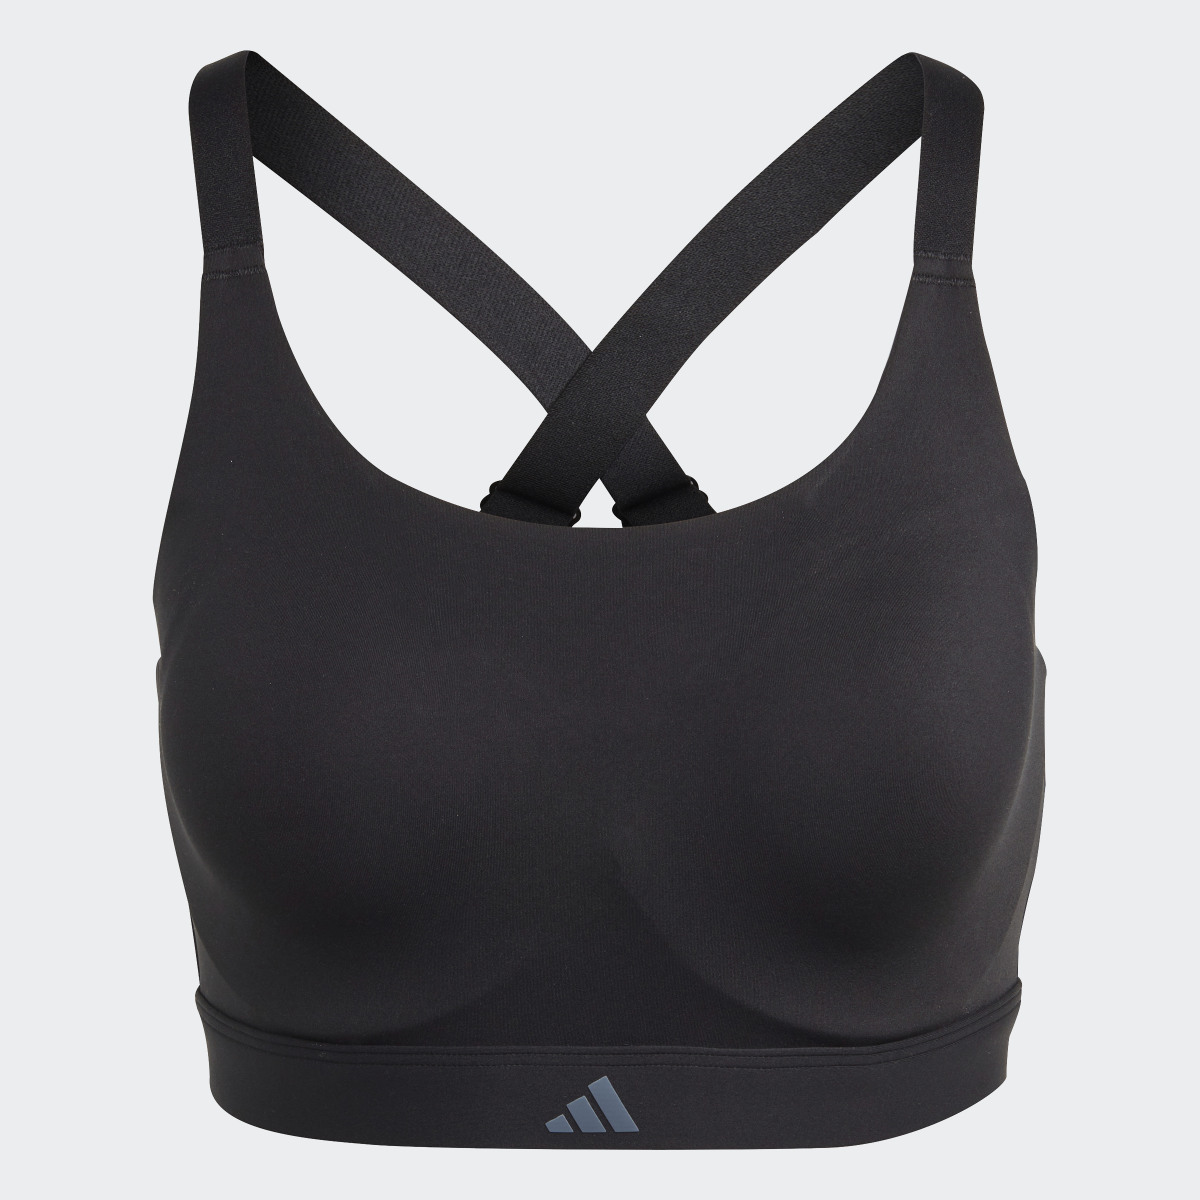 Adidas Brassière Tailored Impact Luxe Training Maintien fort. 7